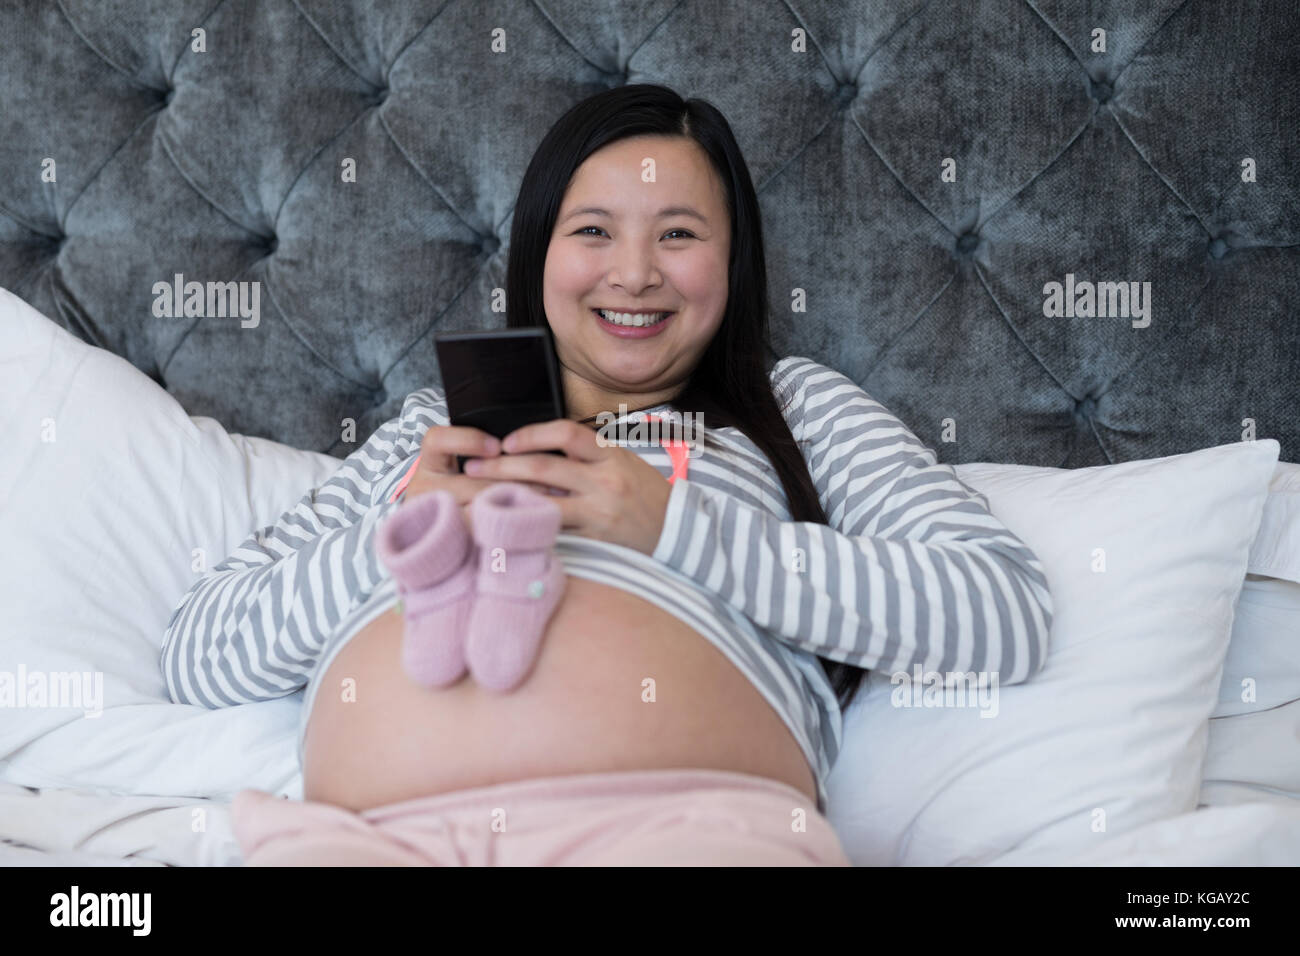 Portrait of woman using mobile with pair of socks on her stomach Stock Photo